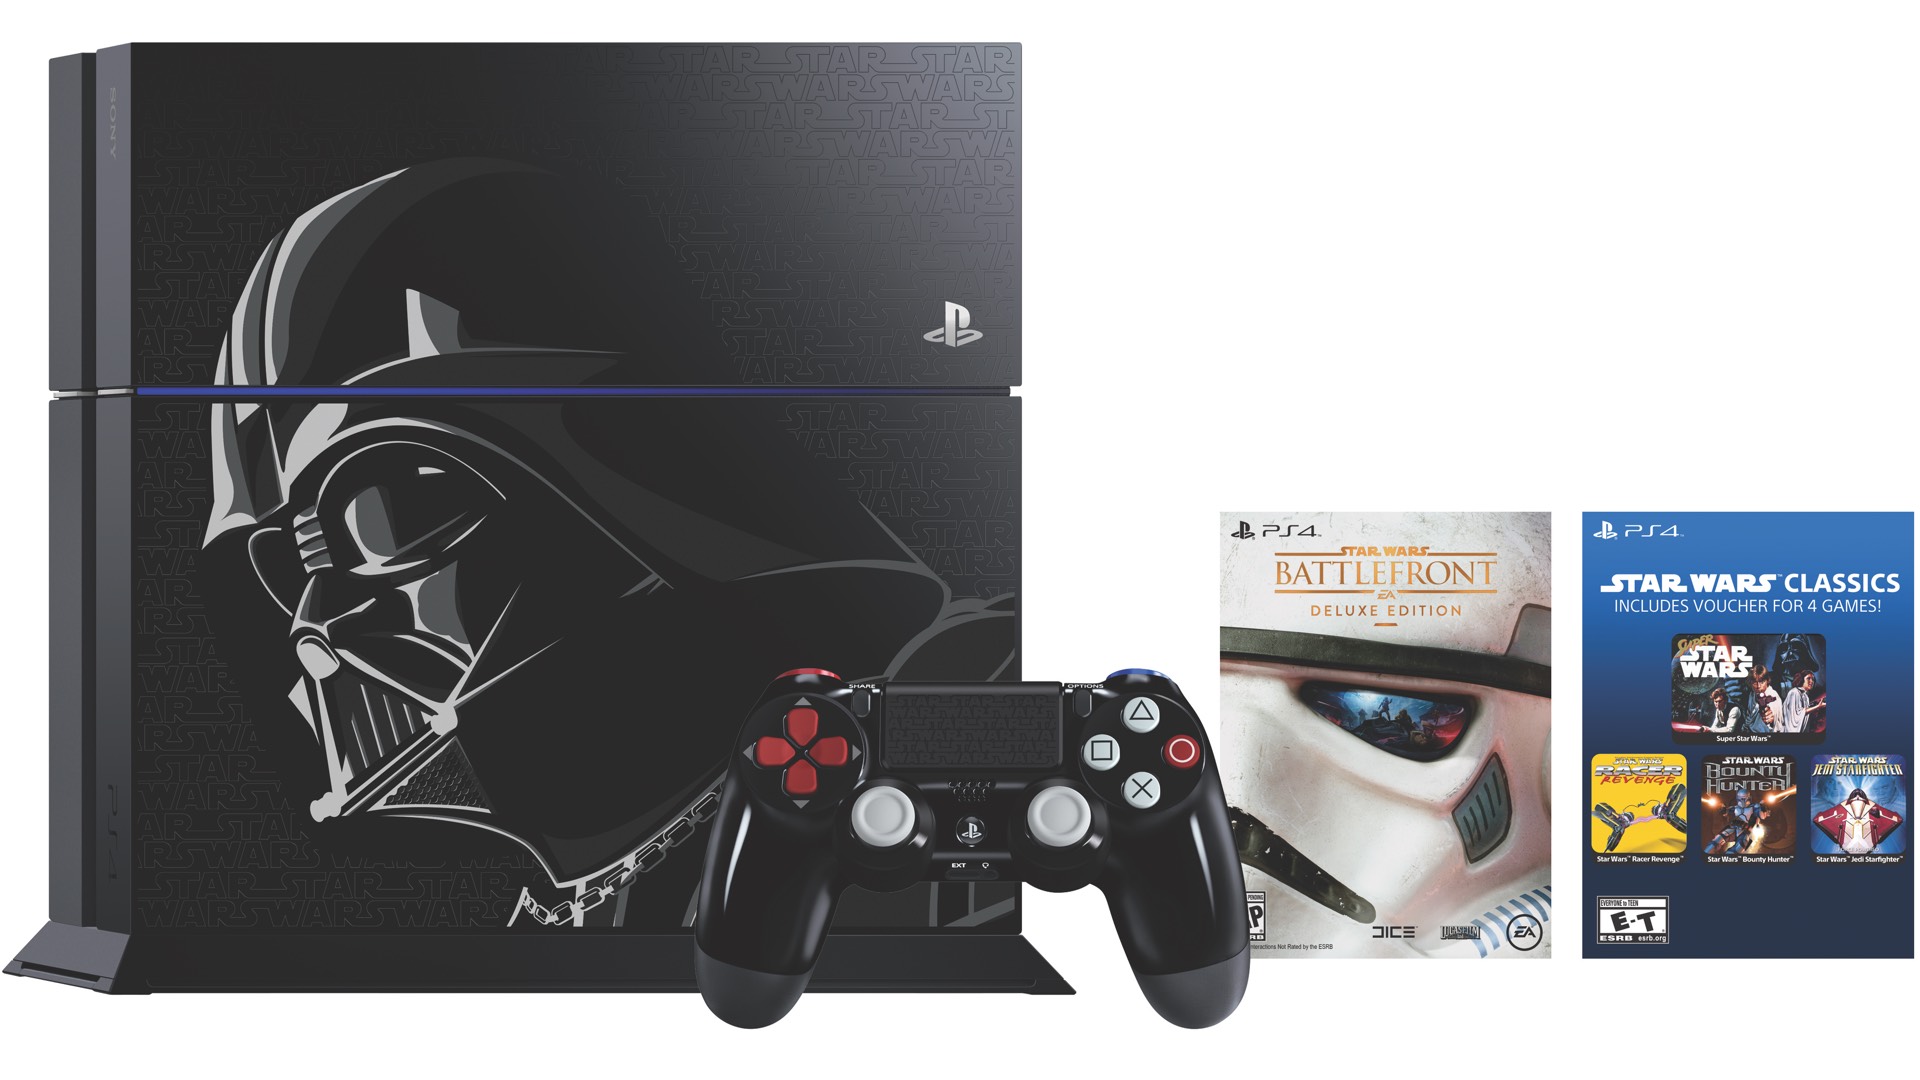 These Are the Star Wars Battlefront PS4 Bundles, Darth Vader Controller Can Be Bought Separately